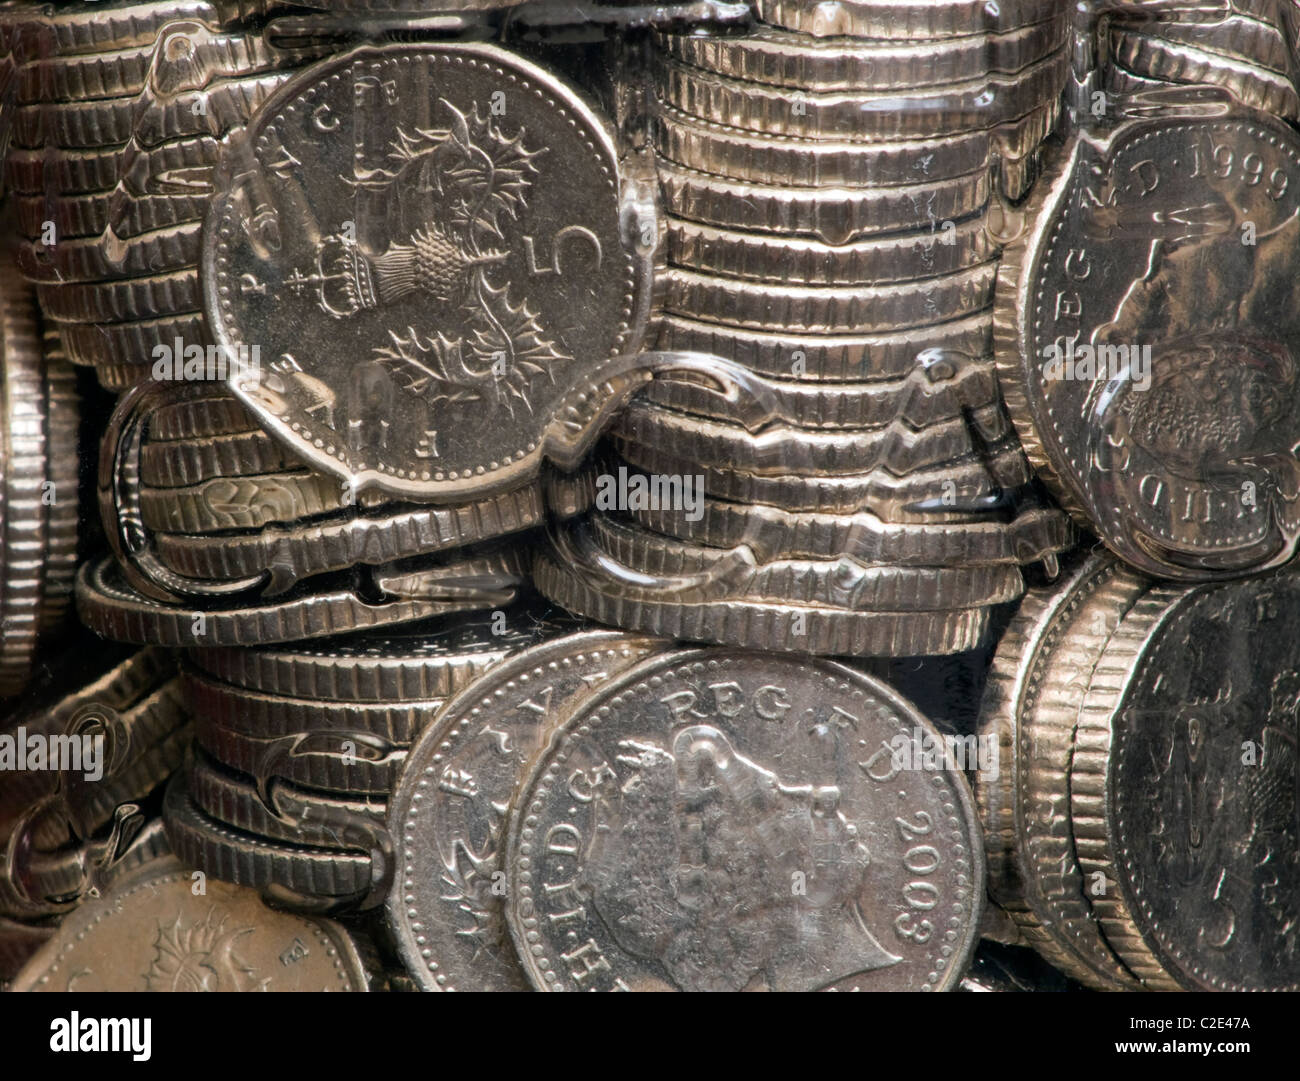 Coins in a Jar Stock Photo